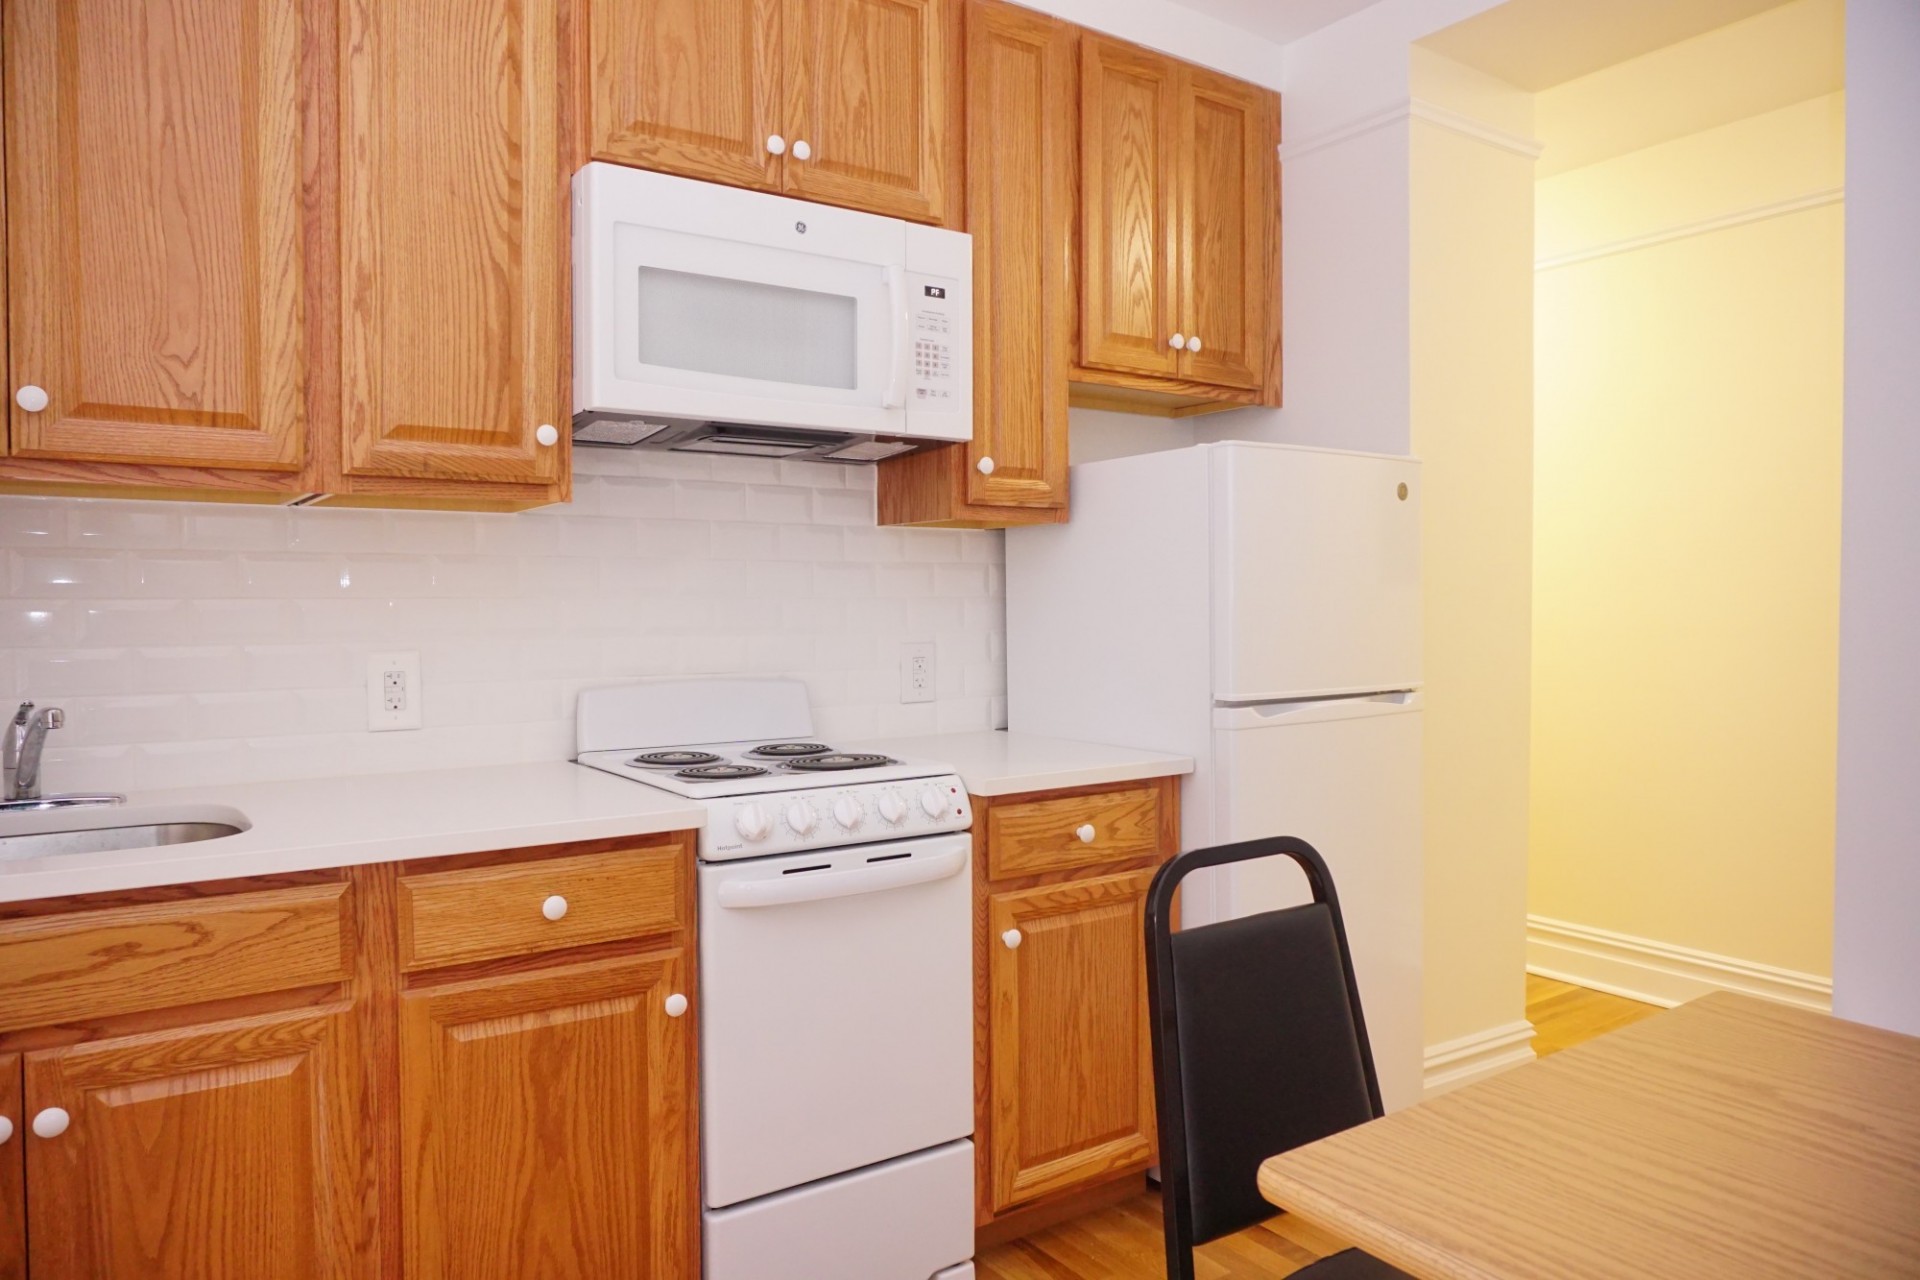 Example of a kitchen in an apartment share.